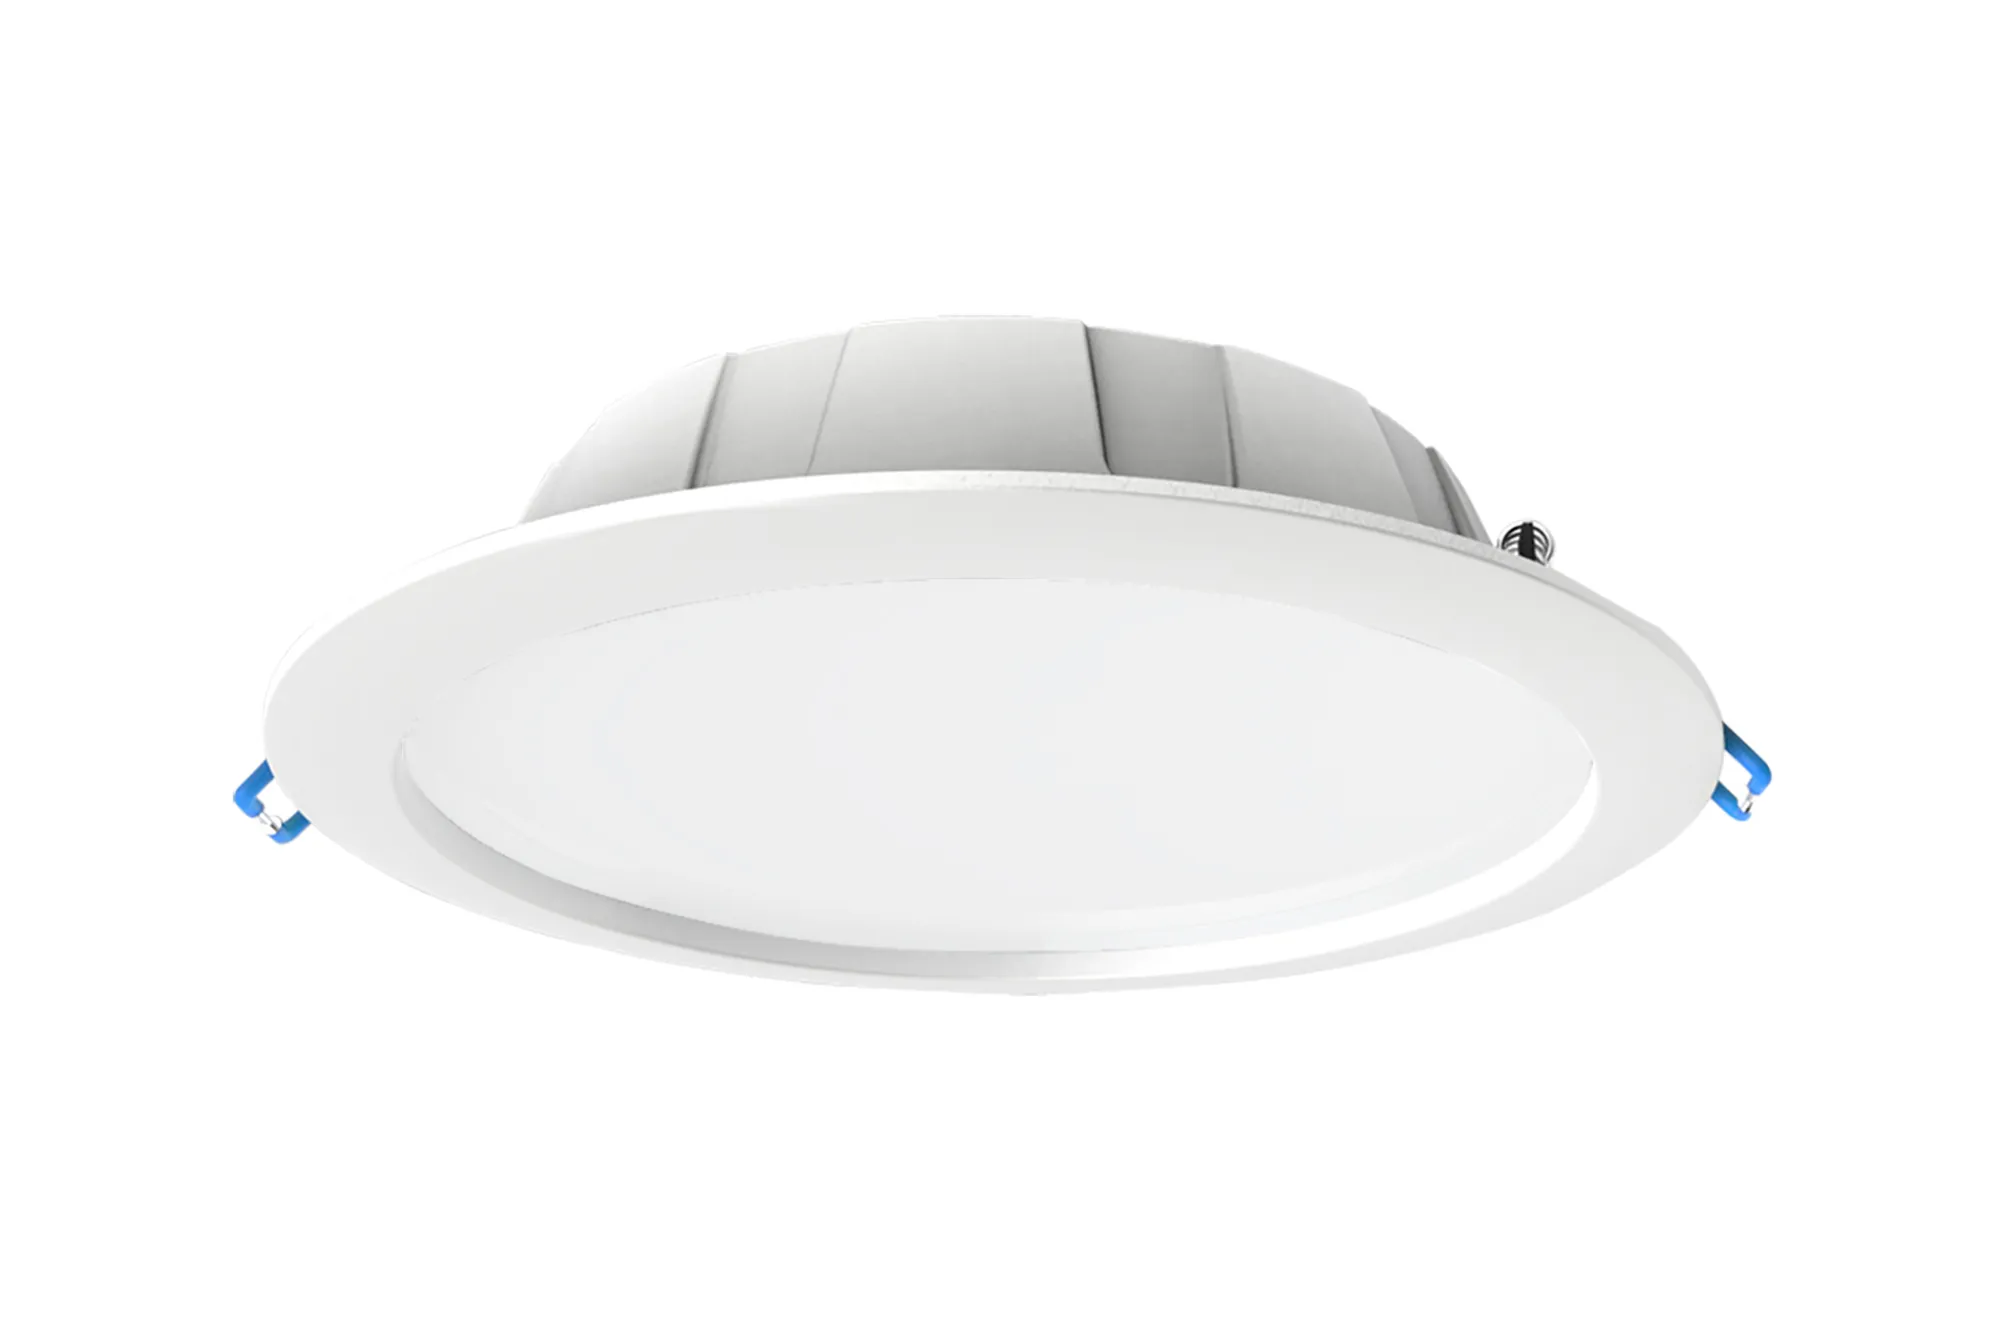 M6393D  Graciosa Round LED Dimmable  Downlight; 15W; 4000K; 1400lm; White;DiaØ180*38mm Cut Out 150mm; IP44; Driver Included; 3yrs Warranty